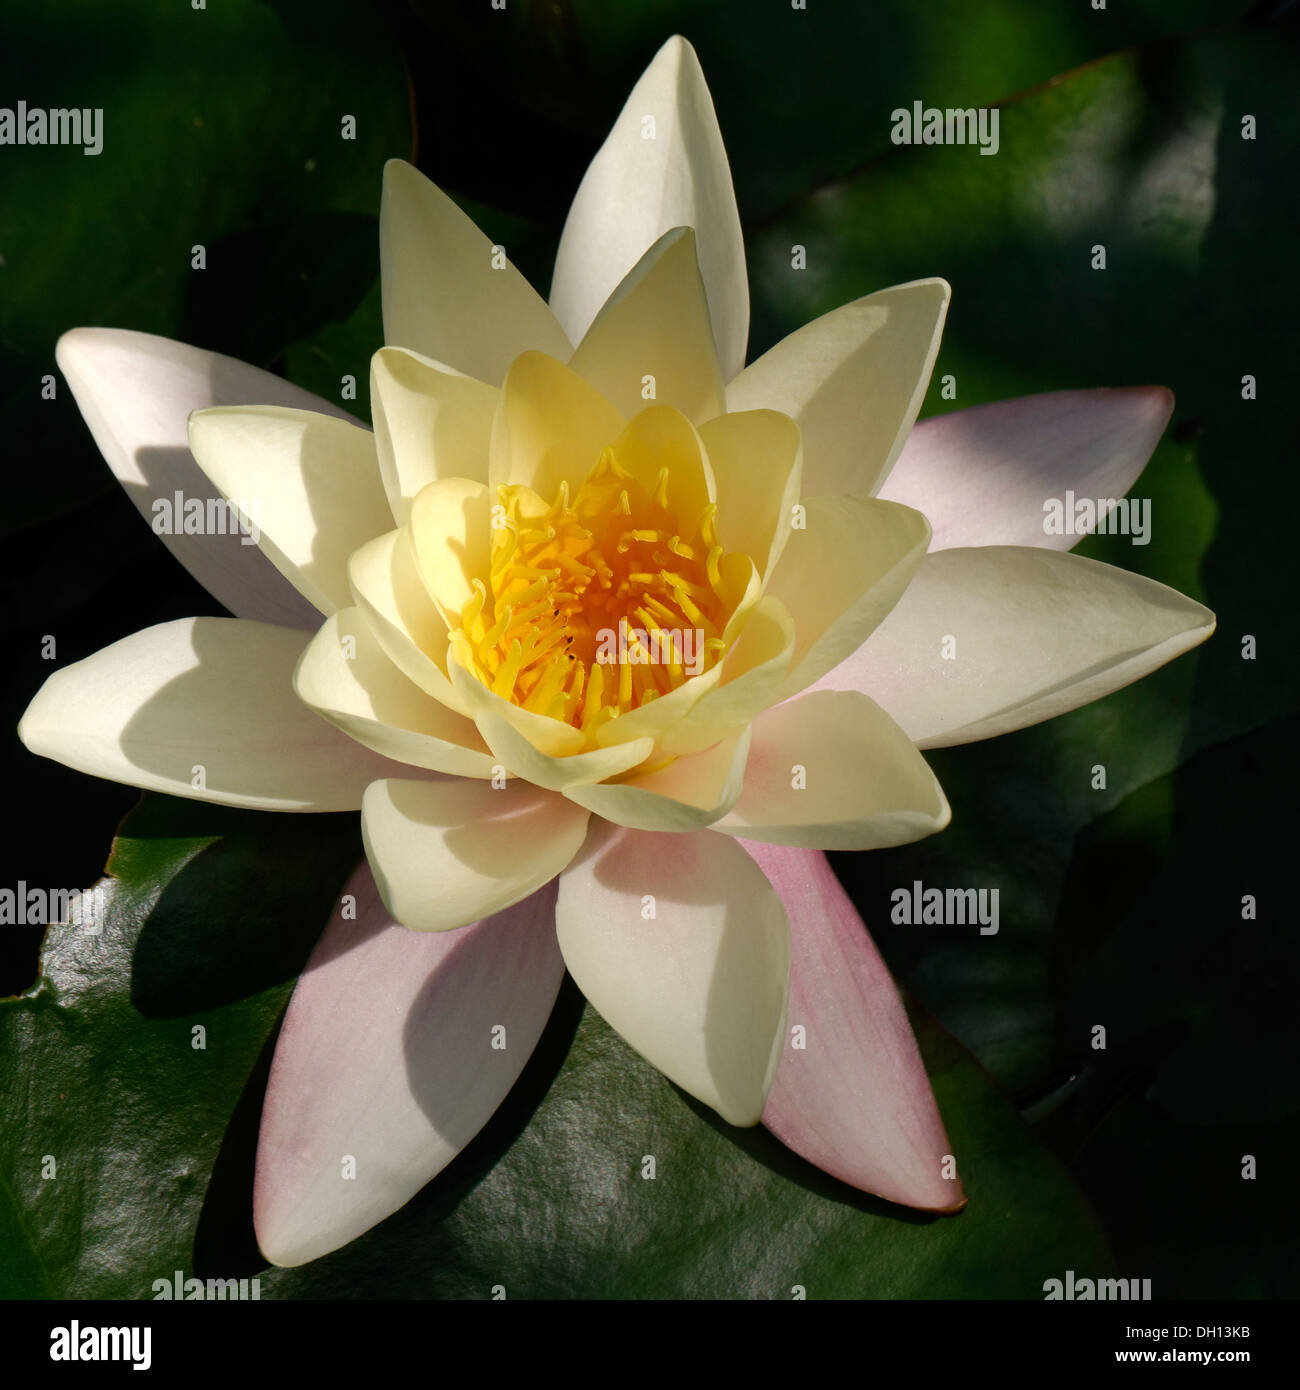 Sunlit white water lily flower with yellow stamens closeup, Rutland, England, UK. Stock Photo